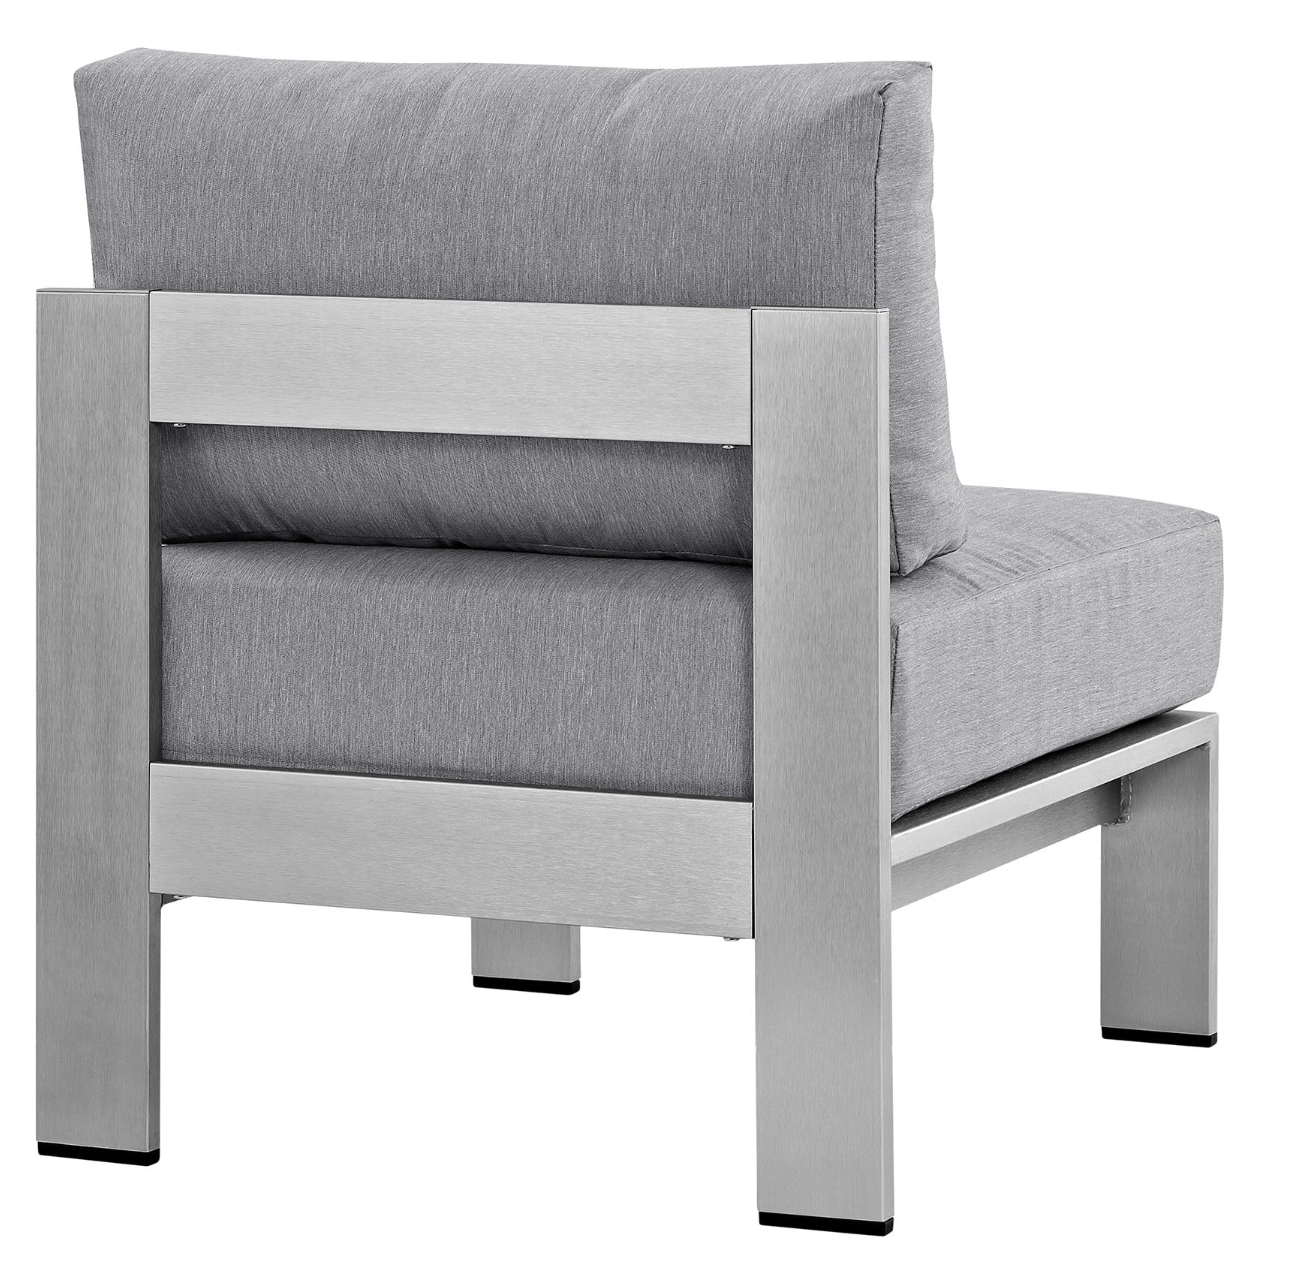 Grey and Silver Aluminum Armless Chair for Sectional Outdoor Sofa